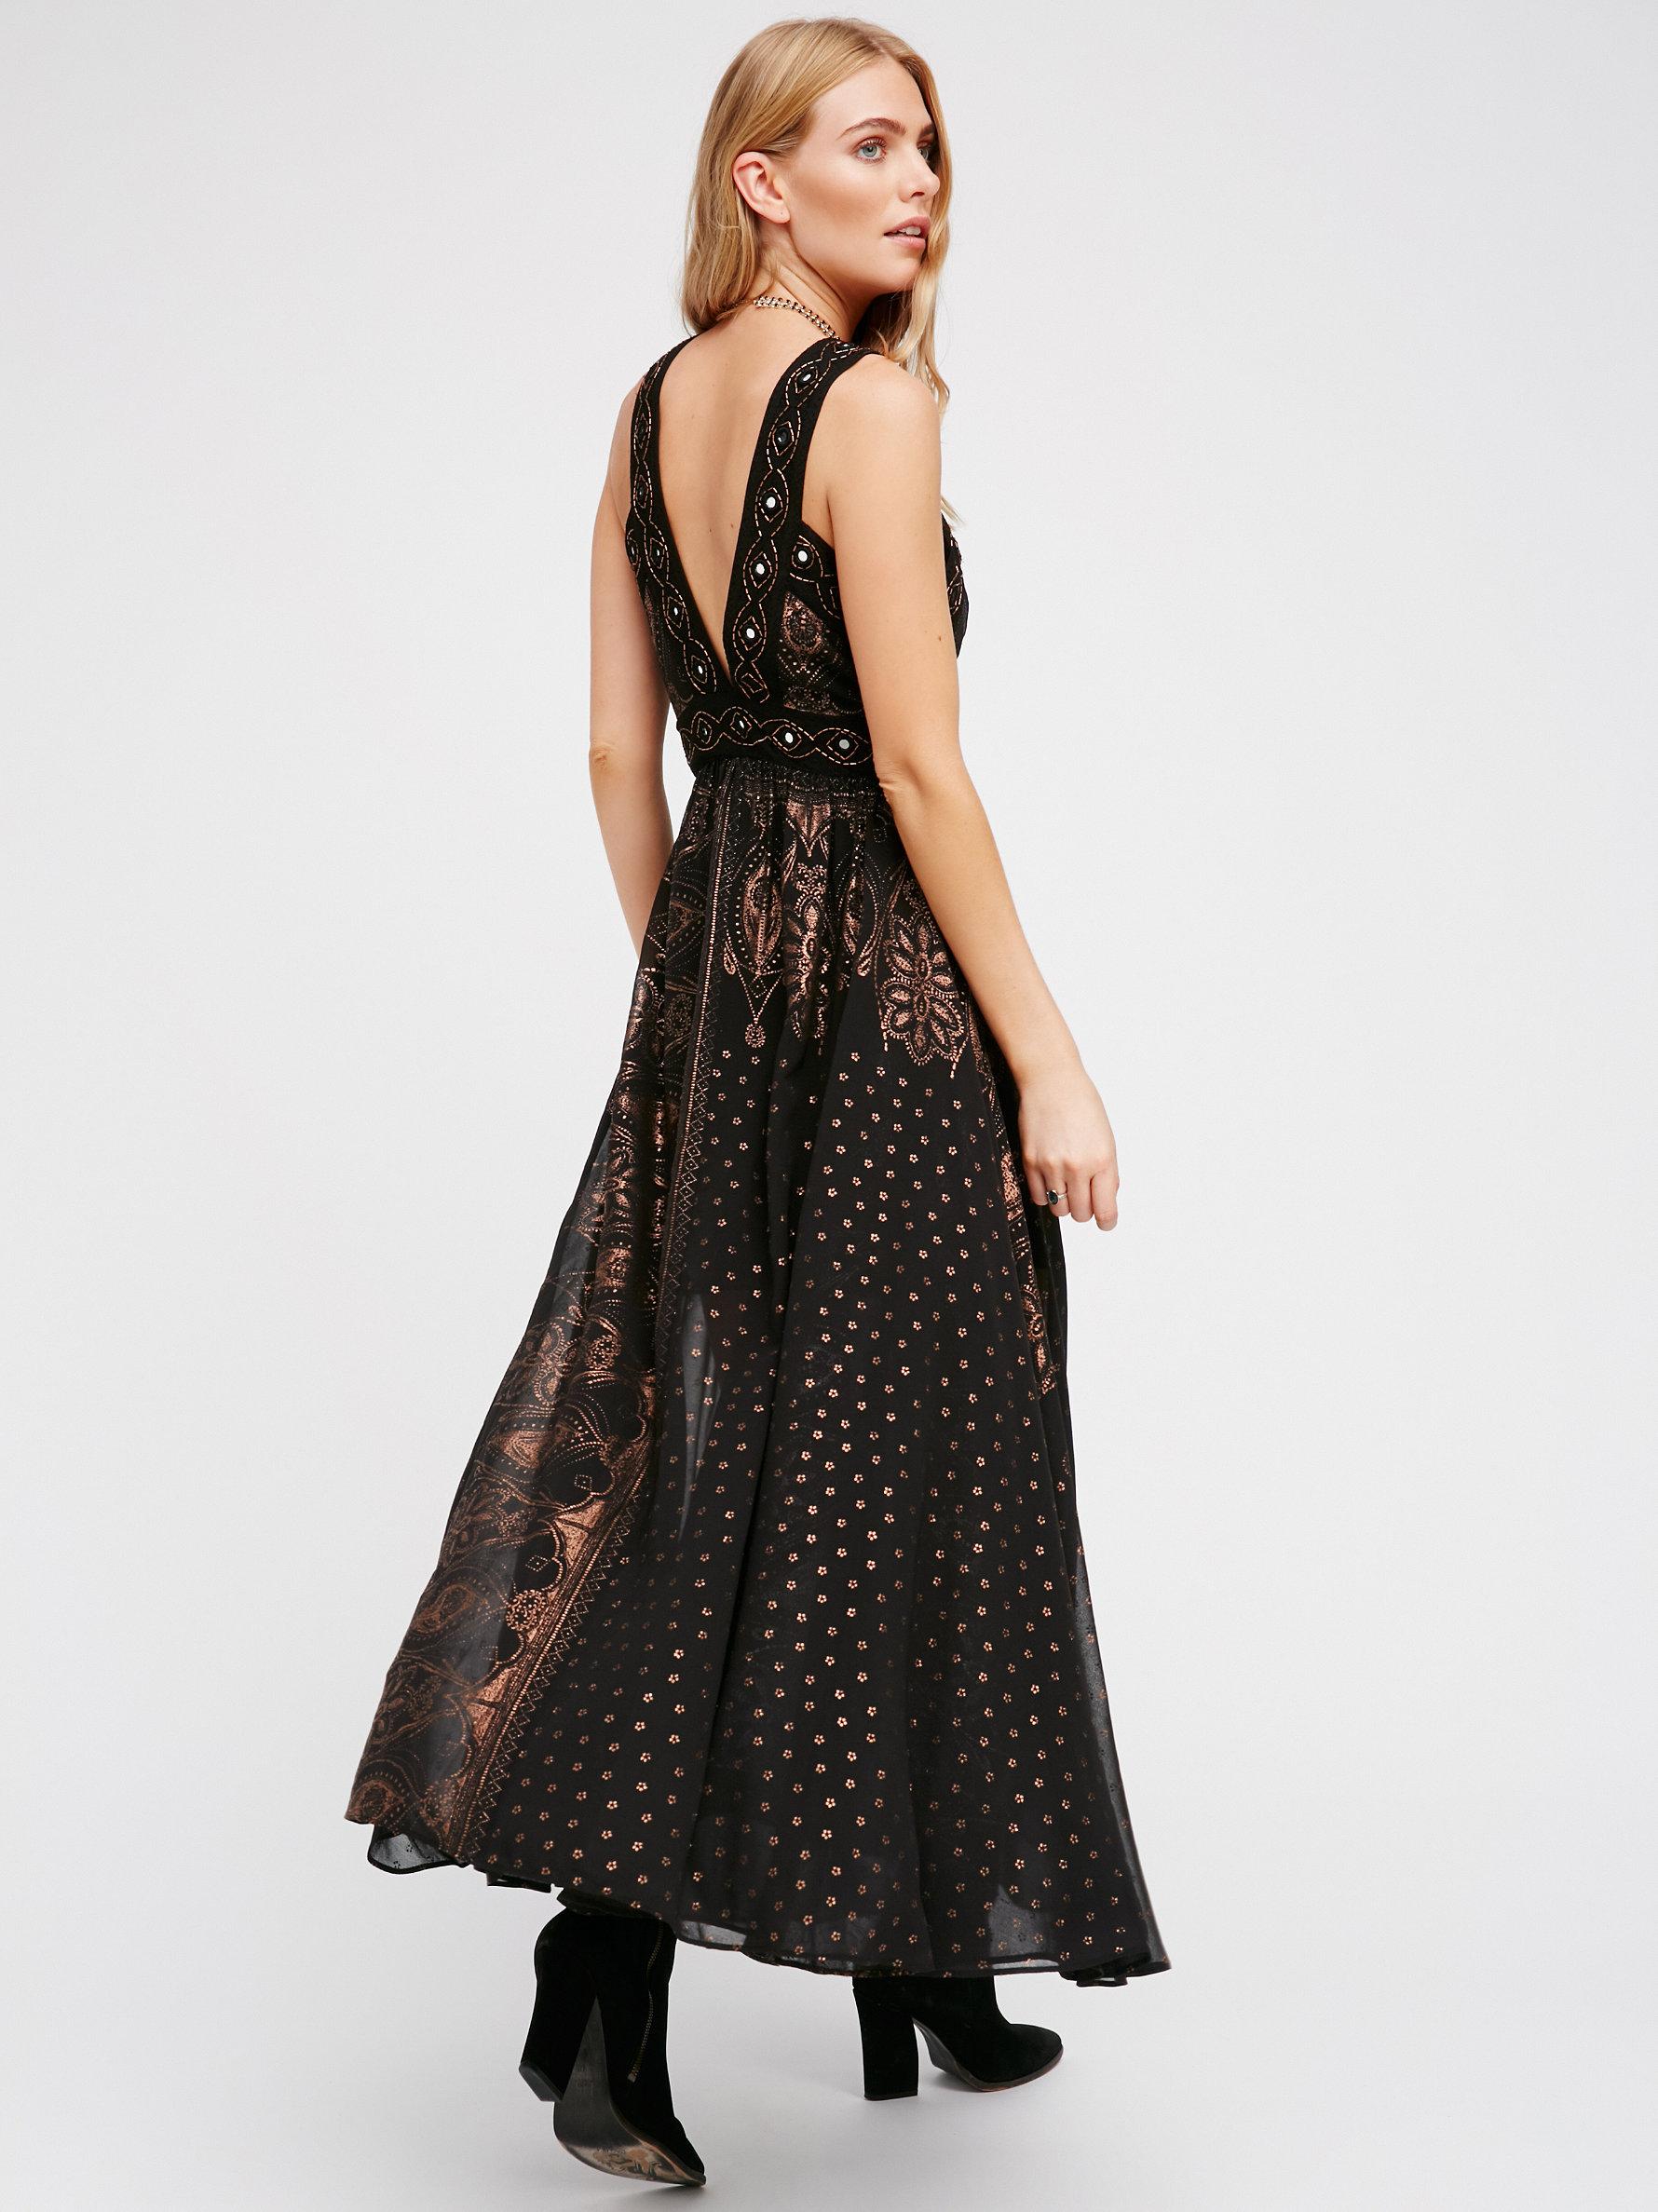 Free People Synthetic Starlight Maxi Dress in Black Combo (Black) - Lyst